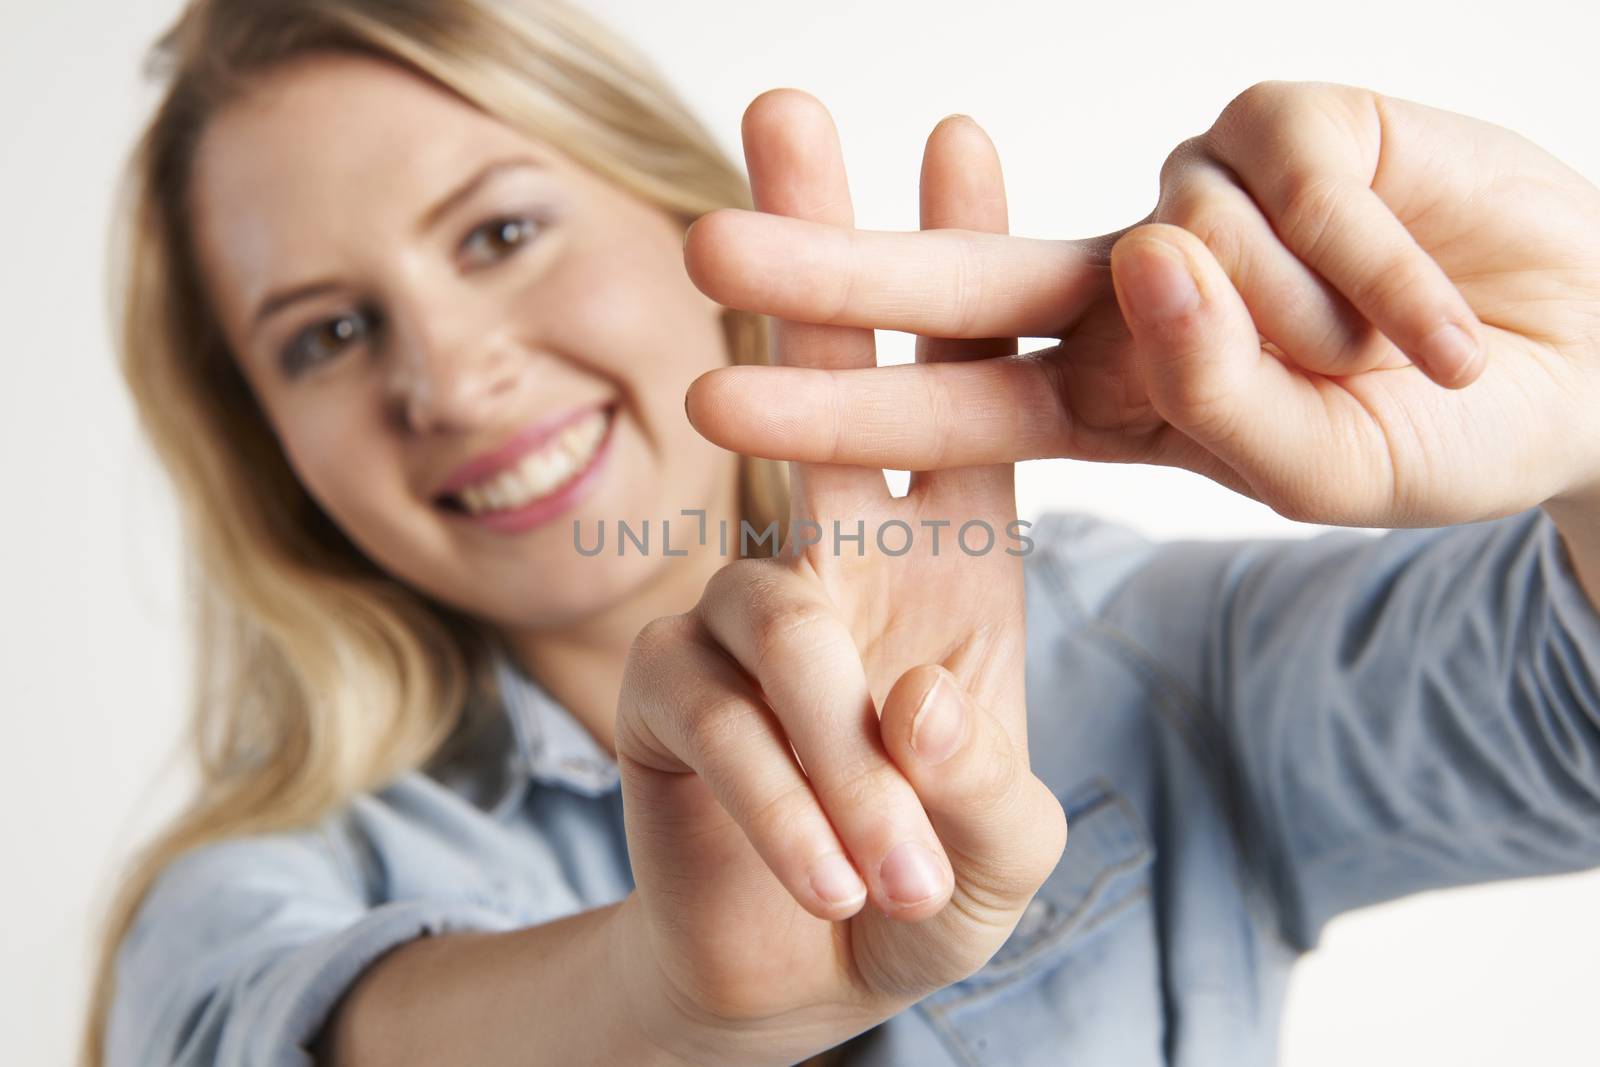 Pretty Girl Making Hashtag Sign With Fingers